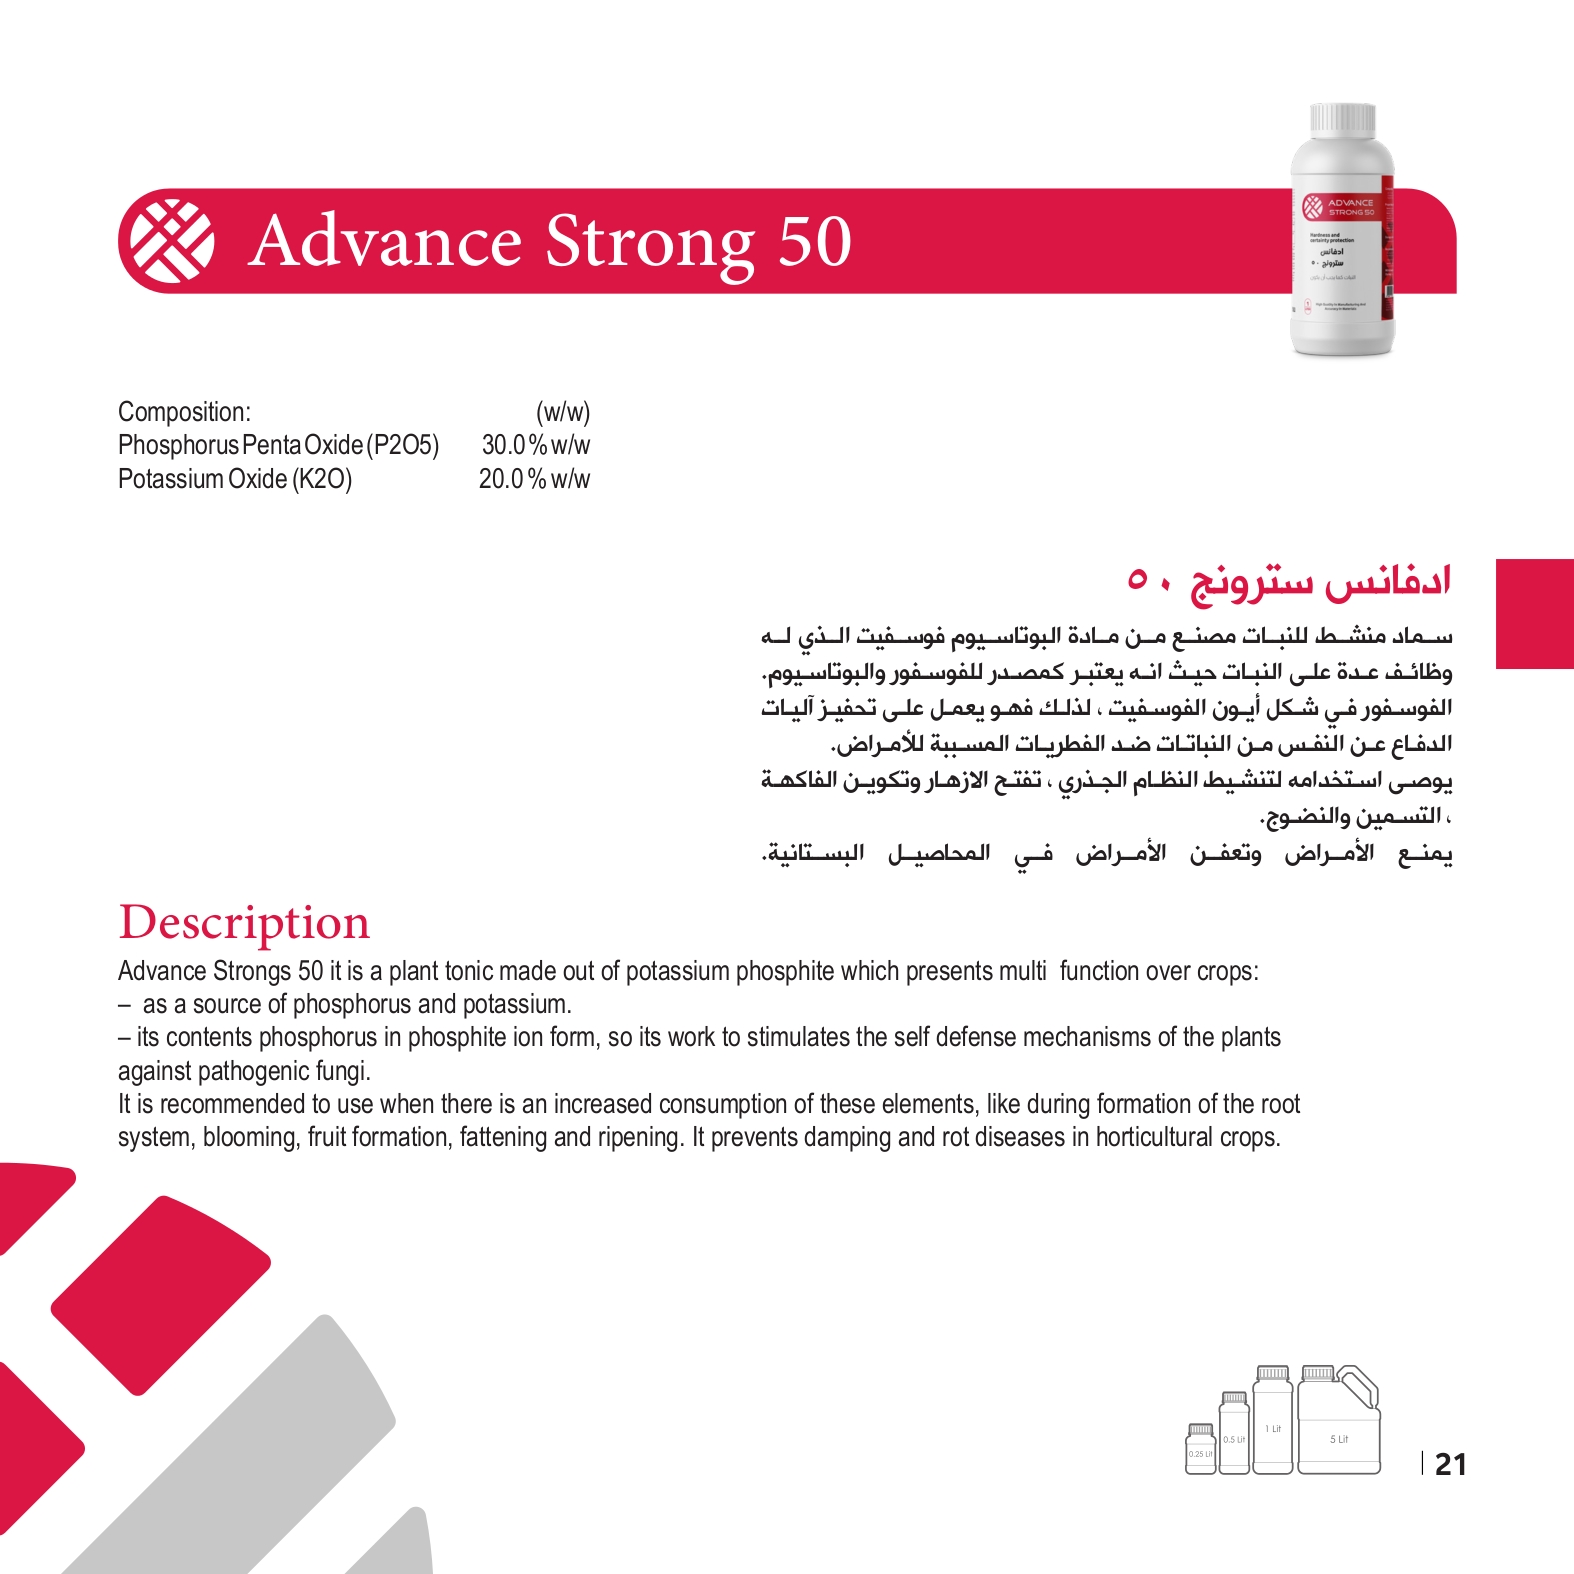 Advance Strong 50 